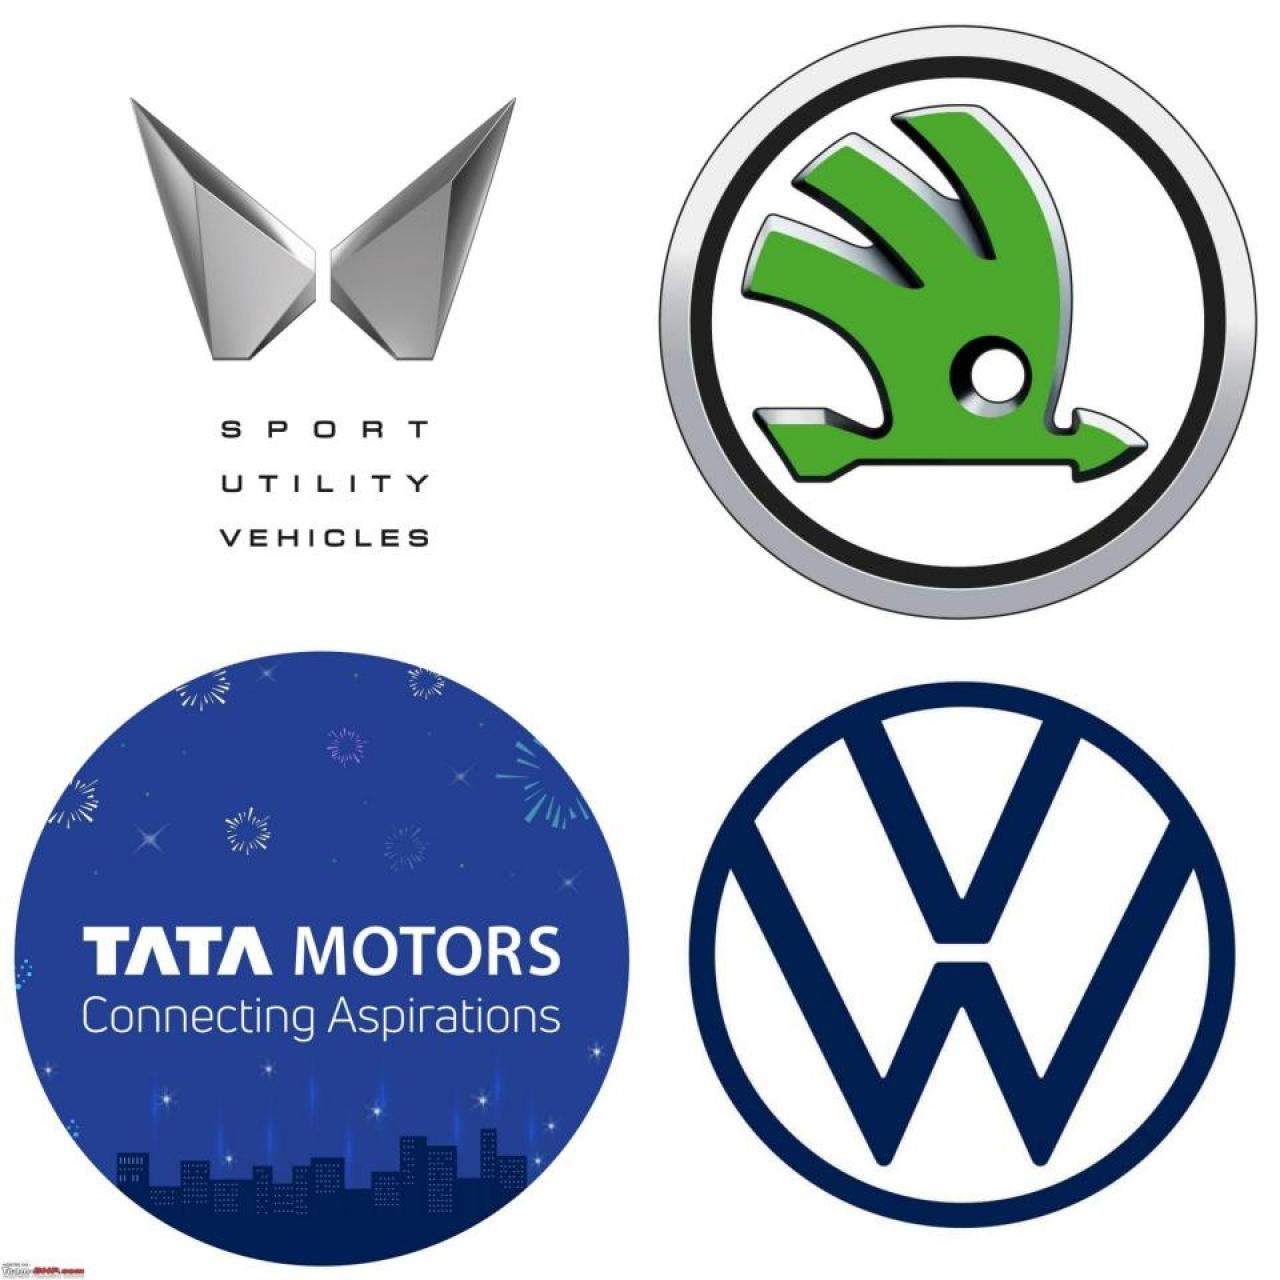 All Car Badges and Logos With Stars